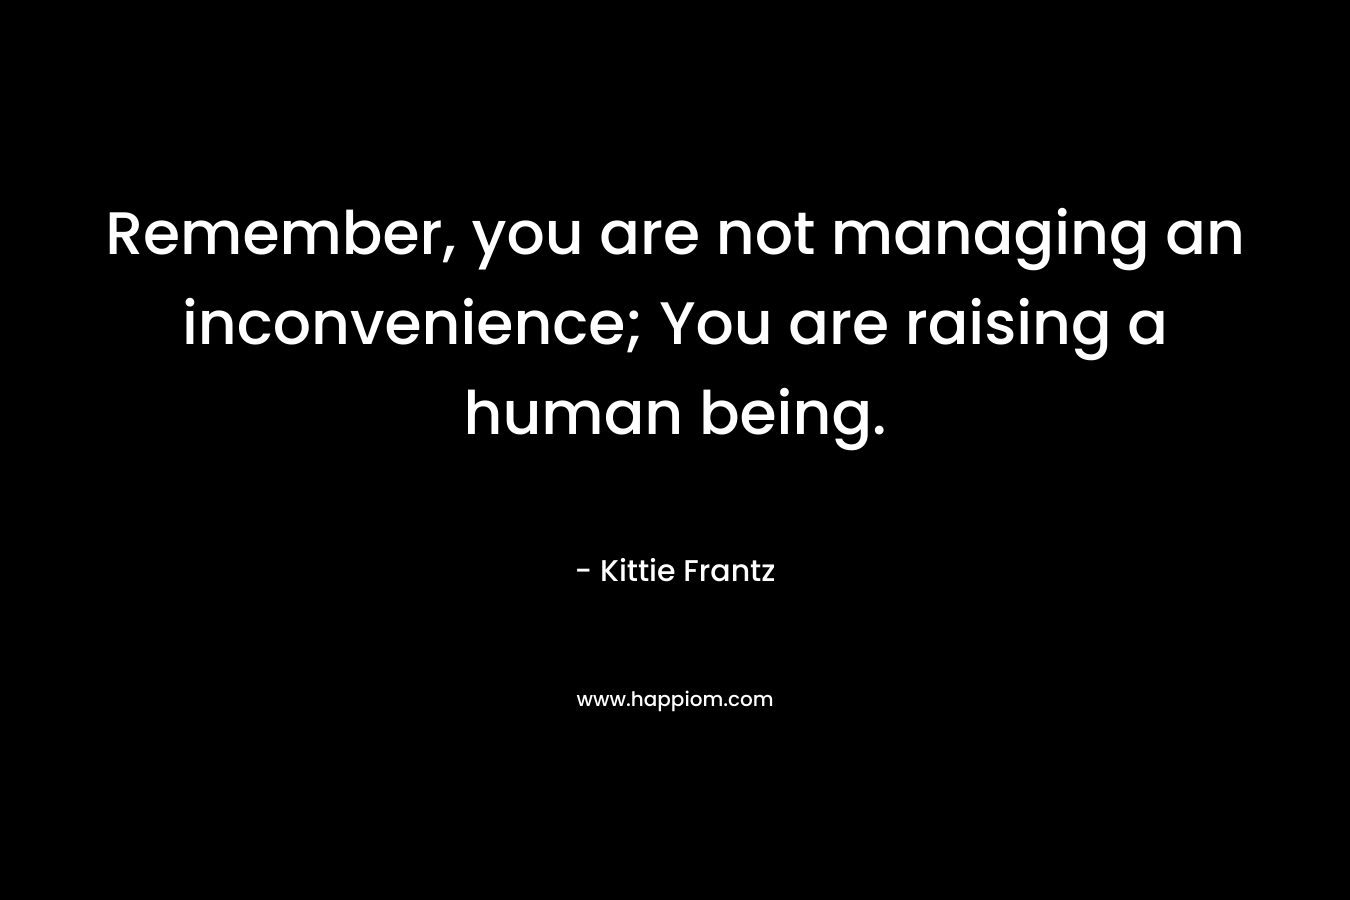 Remember, you are not managing an inconvenience; You are raising a human being. – Kittie Frantz